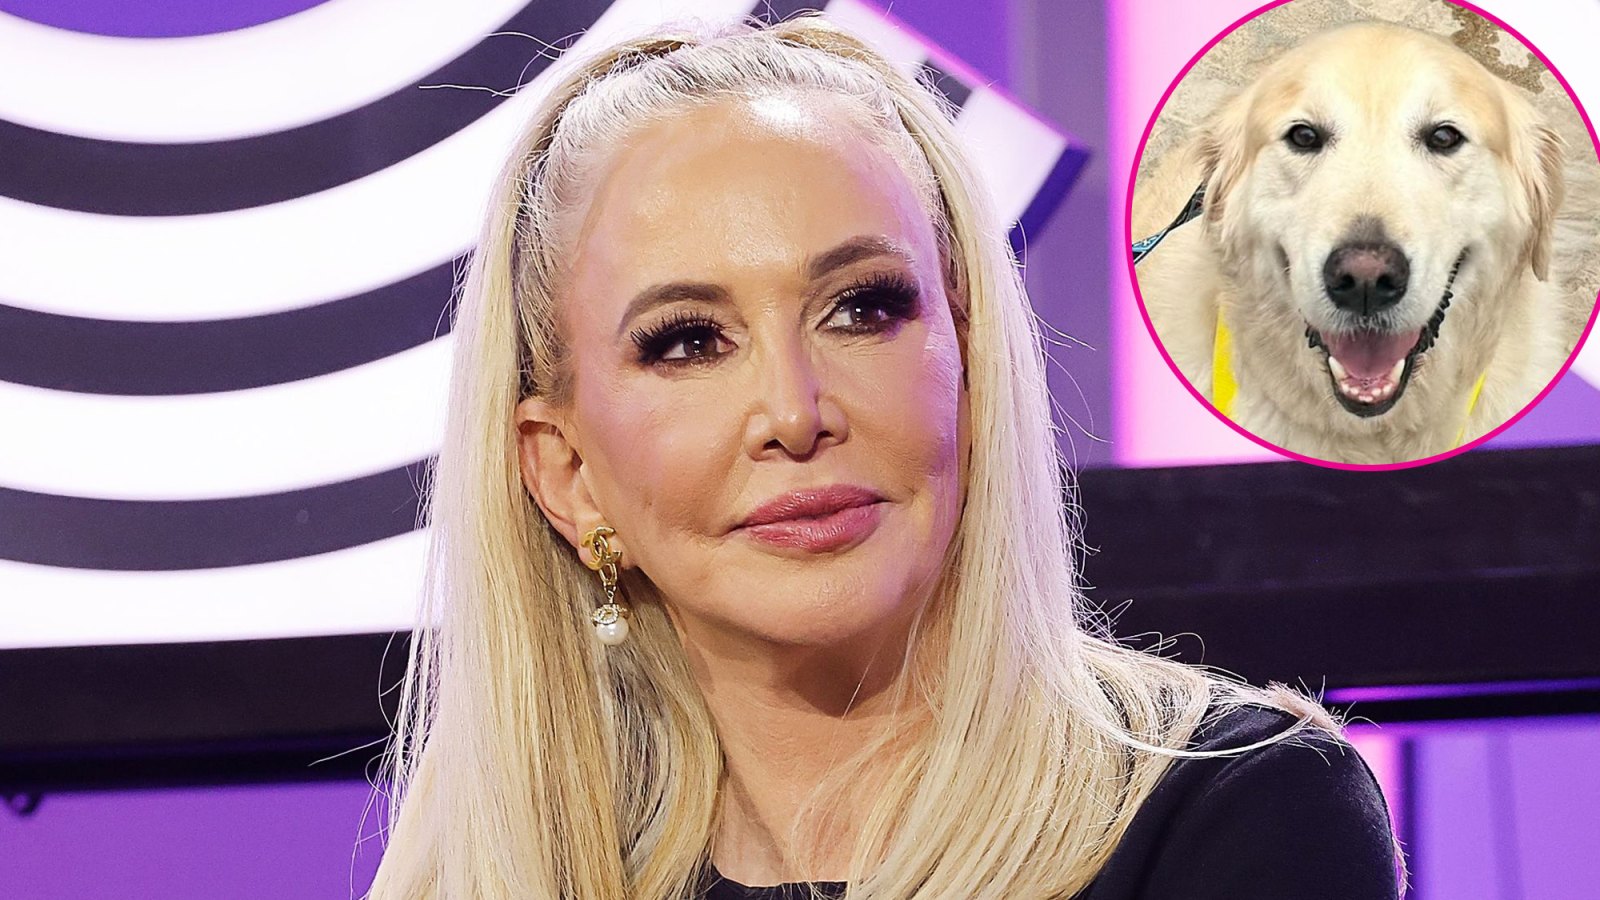 RHOC's Shannon Beador Says Dog Archie 'Will Be OK' After Being Attacked and Bitten by Another Dog